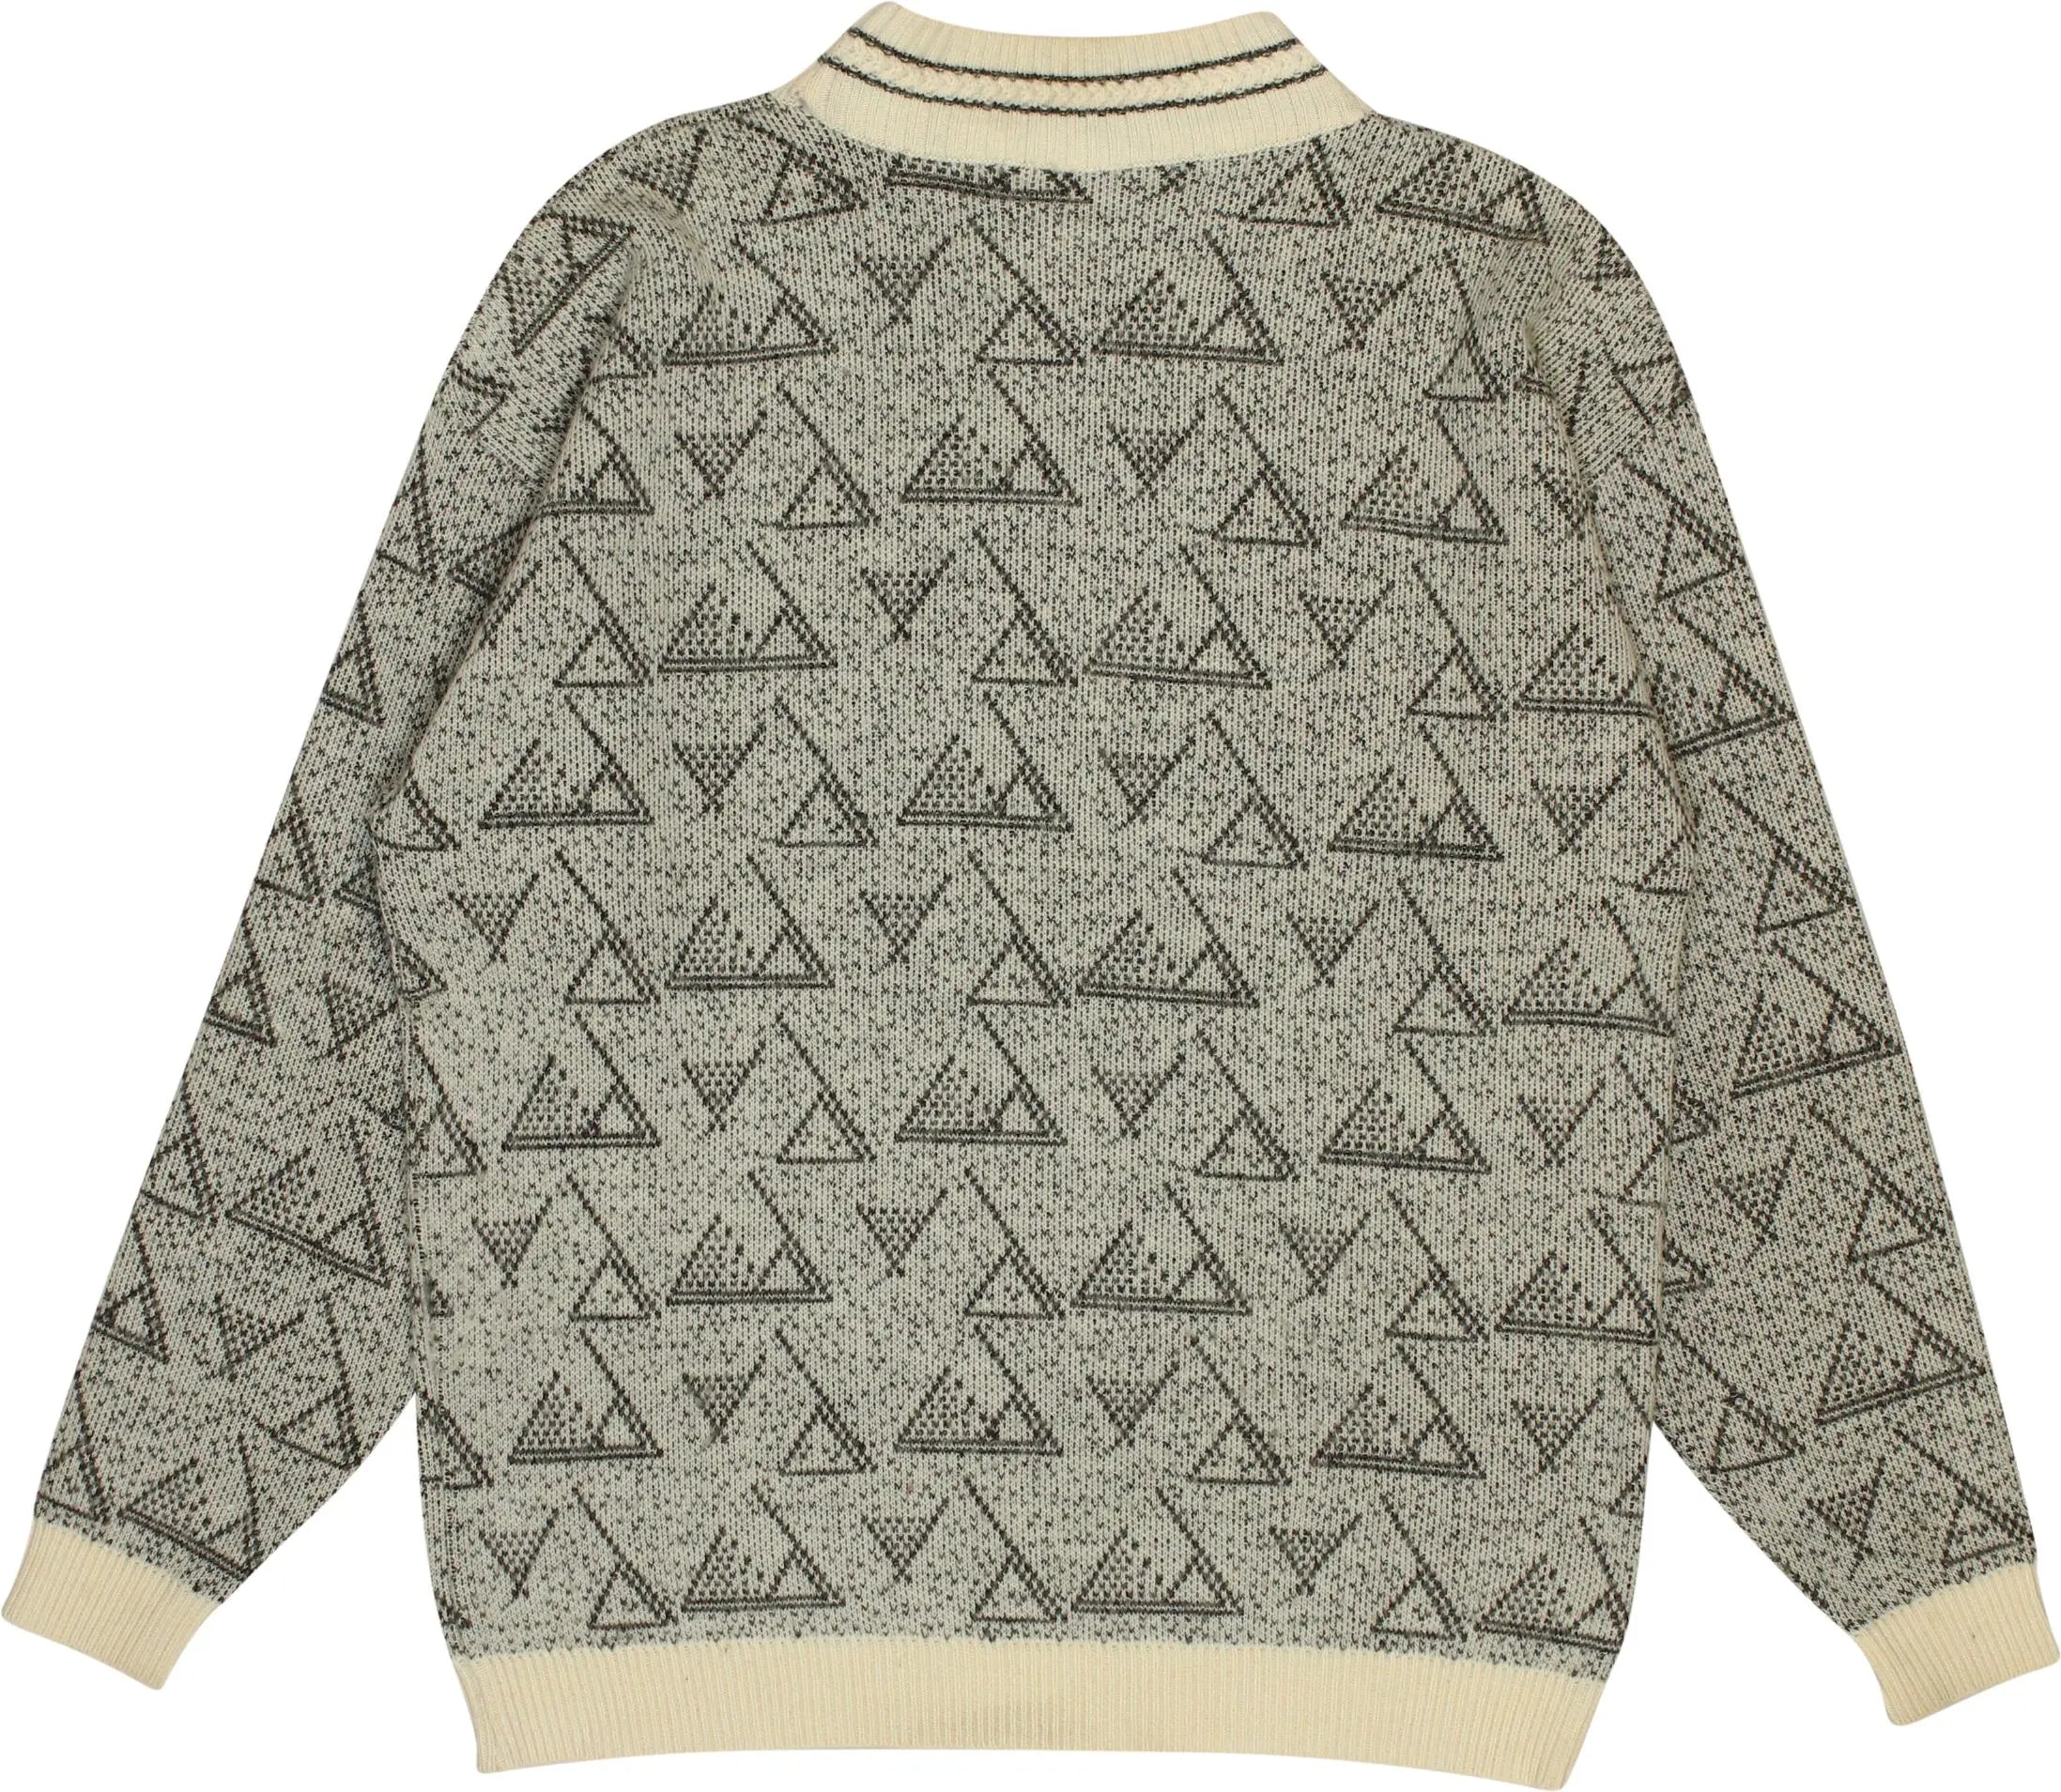 Unknown - Grey Patterned Jumper- ThriftTale.com - Vintage and second handclothing